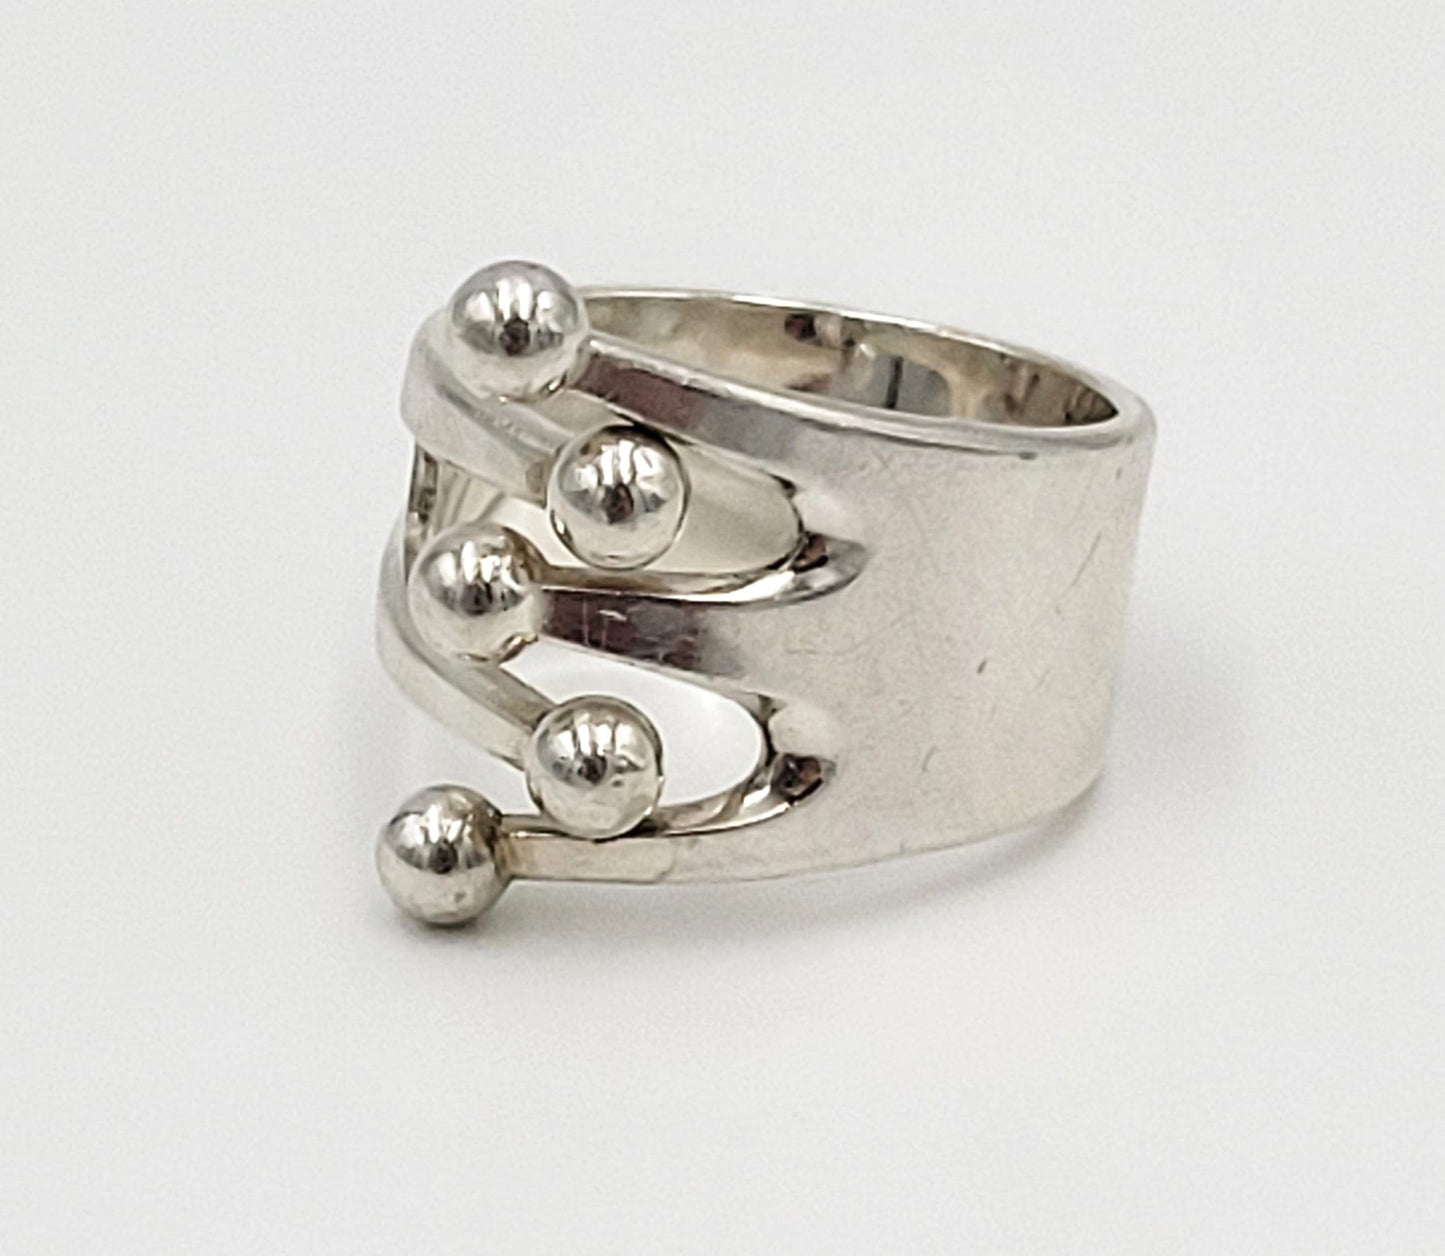 Norway Plus Designs Jewelry Norway Plus Designs AGE Sterling Modernist 5 Prong Jester Ring Circa 1960s